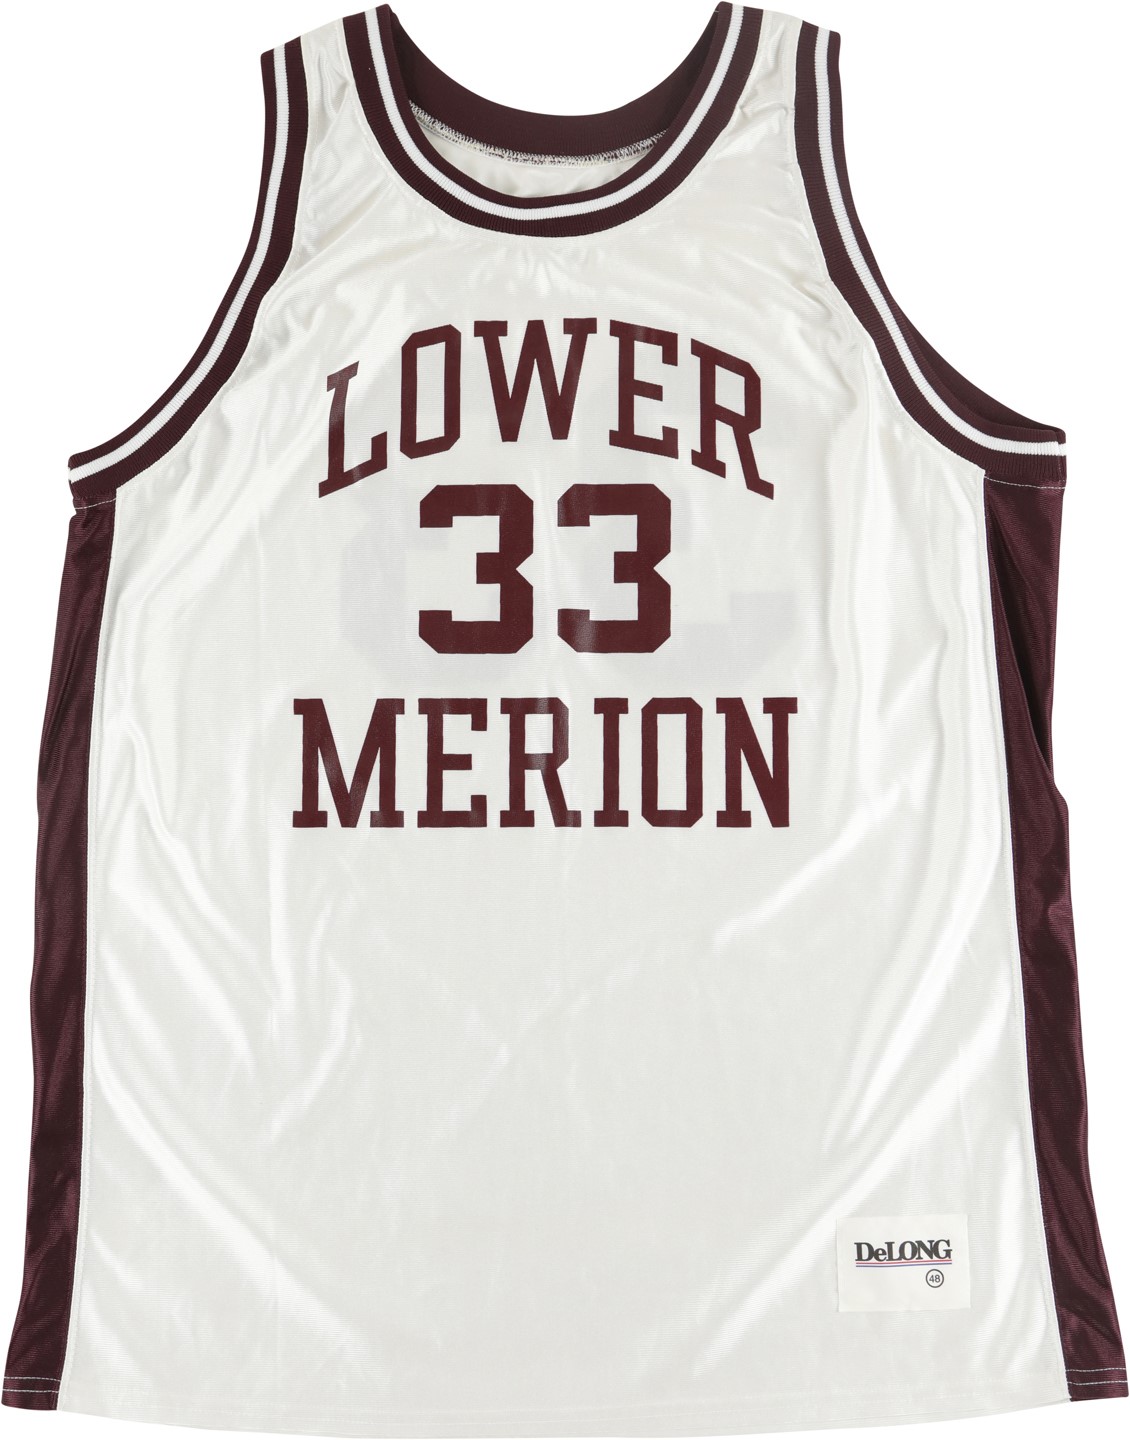 Basketball - Kobe Bryant Lower Merion High School Game Worn Jersey - Sources from Kobe's Agent & Former NBA Player (MEARS A10)